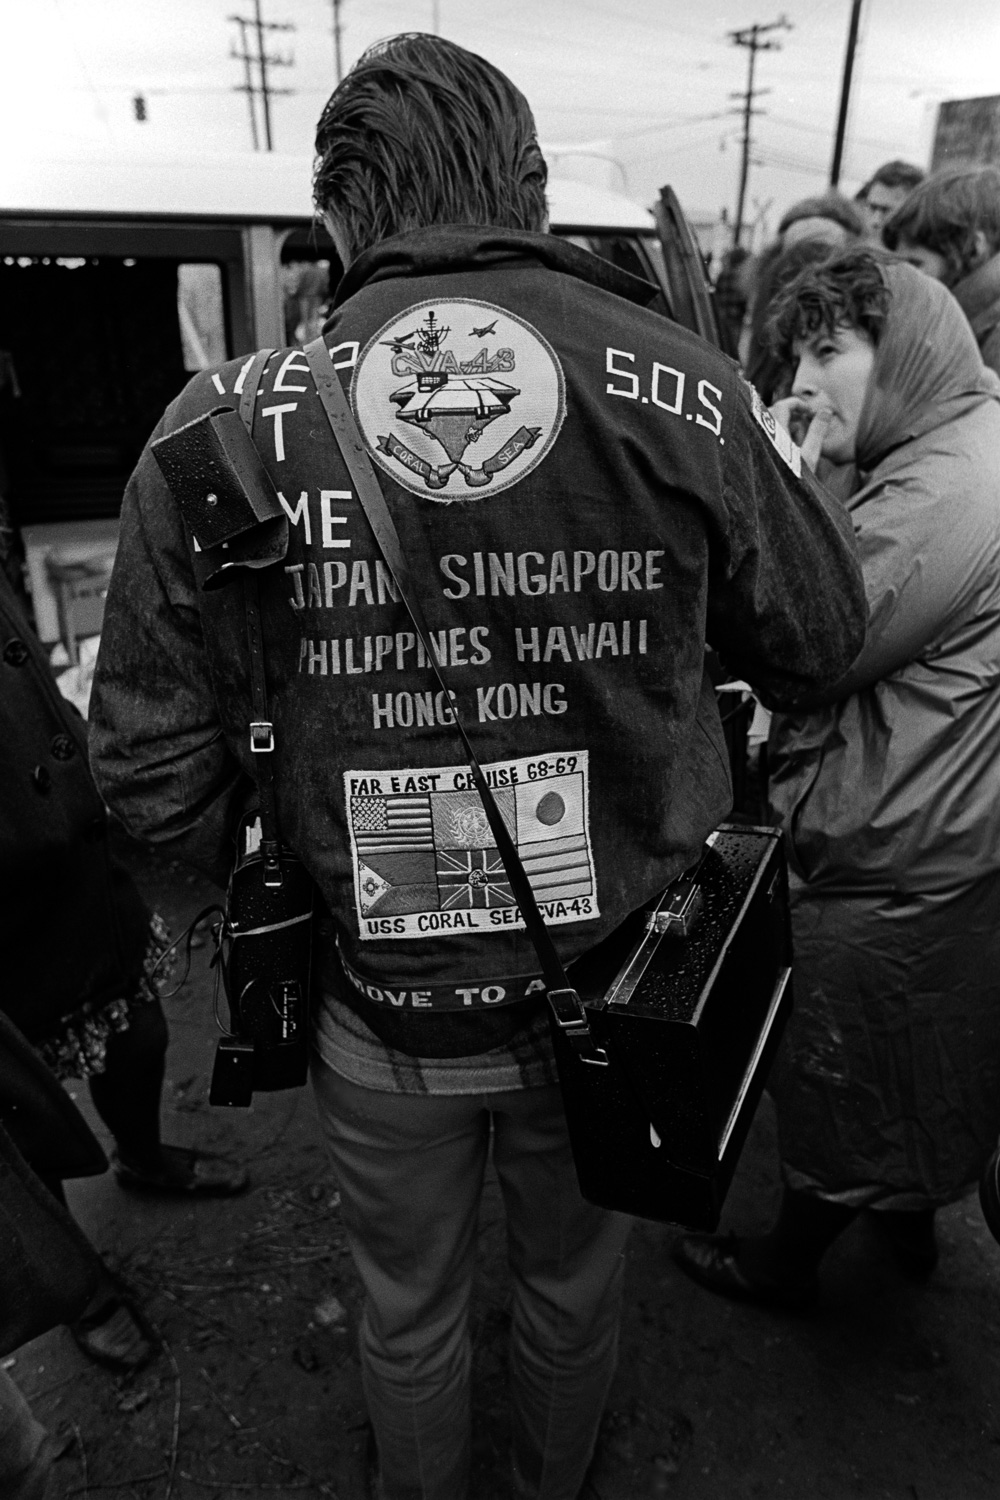  This sailor's jacket reflects the ports-of-call where his ship, the USS Coral Sea, has called. At the top of his jacket, he added: "Keep it home. SOS." 